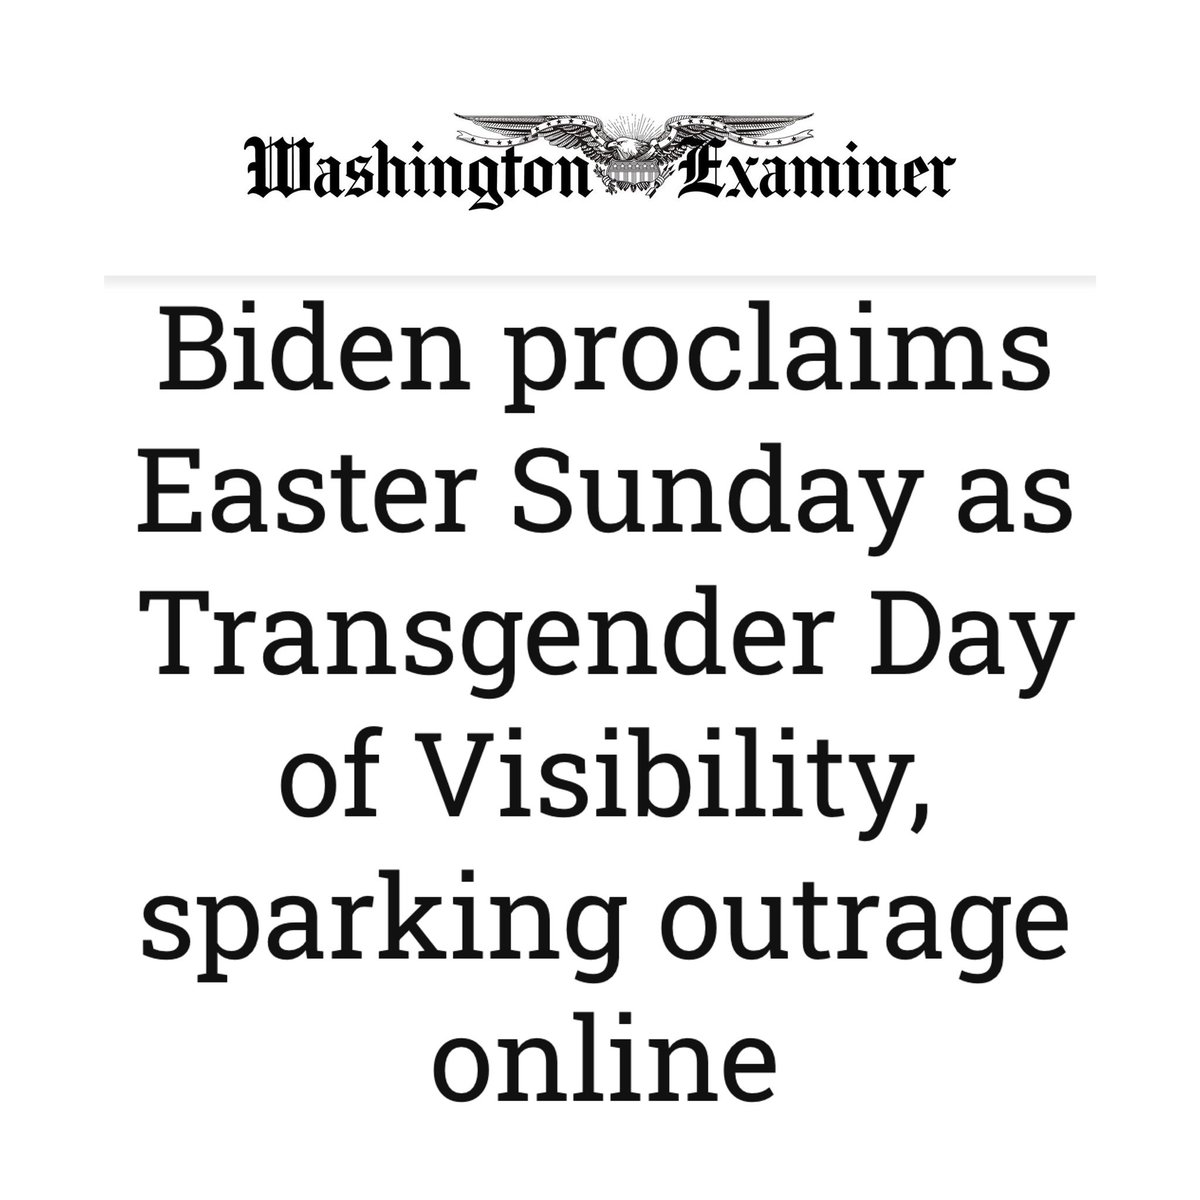 Of all the days on the calendar, the leader of the nation with the largest Christian population in the world has declared this on Easter Sunday…the left disturbingly goes out of its way in their attempt to replace religion…just like communist countries do.